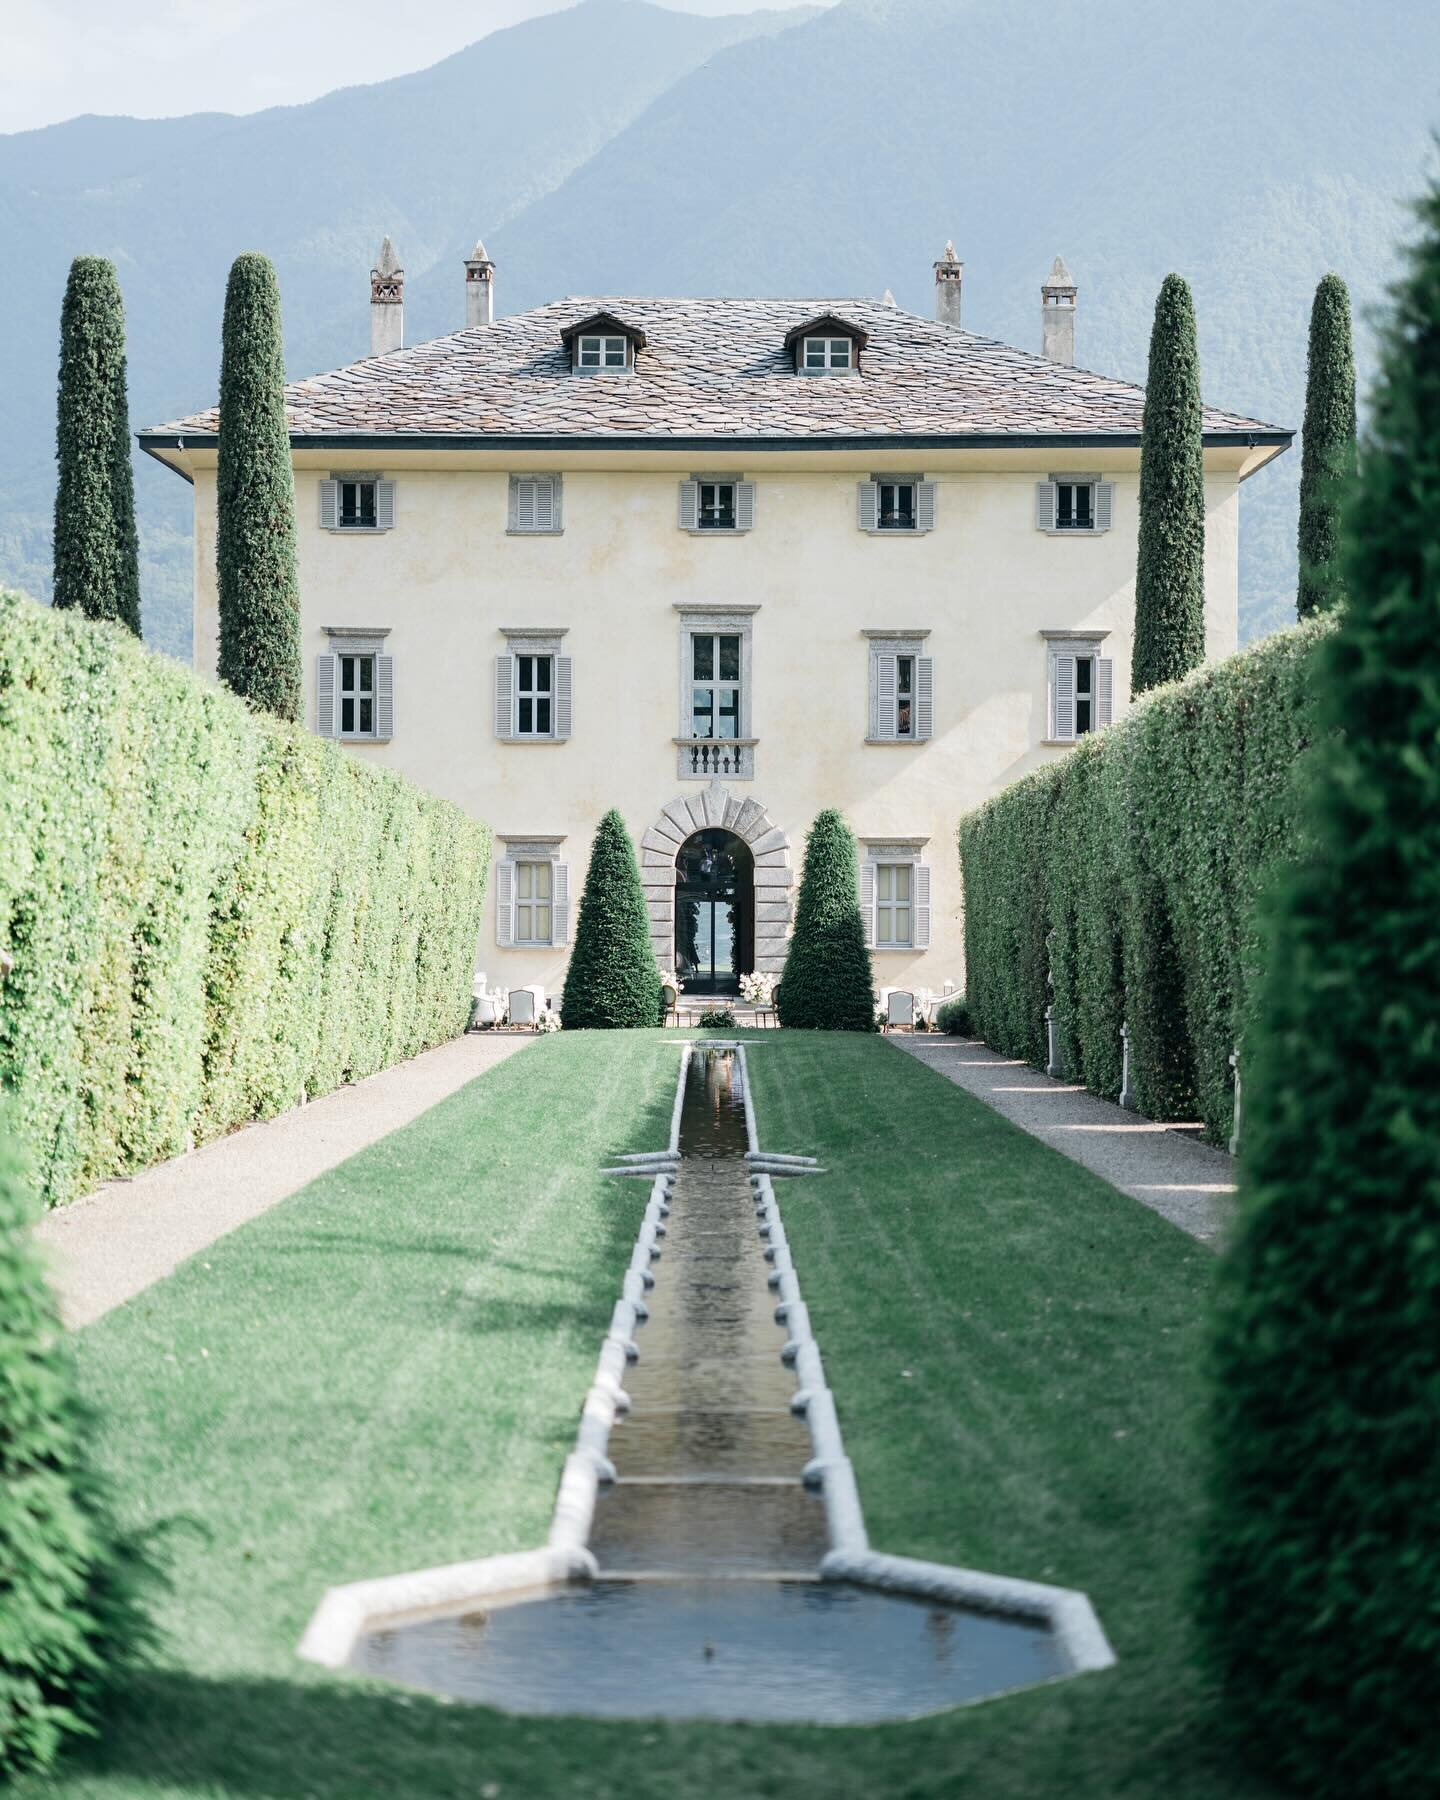 Six months since we were driving through the tiny streets of lake como to photograph S&amp;M&rsquo;s incredible wedding at the beautiful @villa_balbiano 

#weddingphotography #weddingdress #lakecomo #lakecomowedding #lakecomoweddingplanner #lakecomow